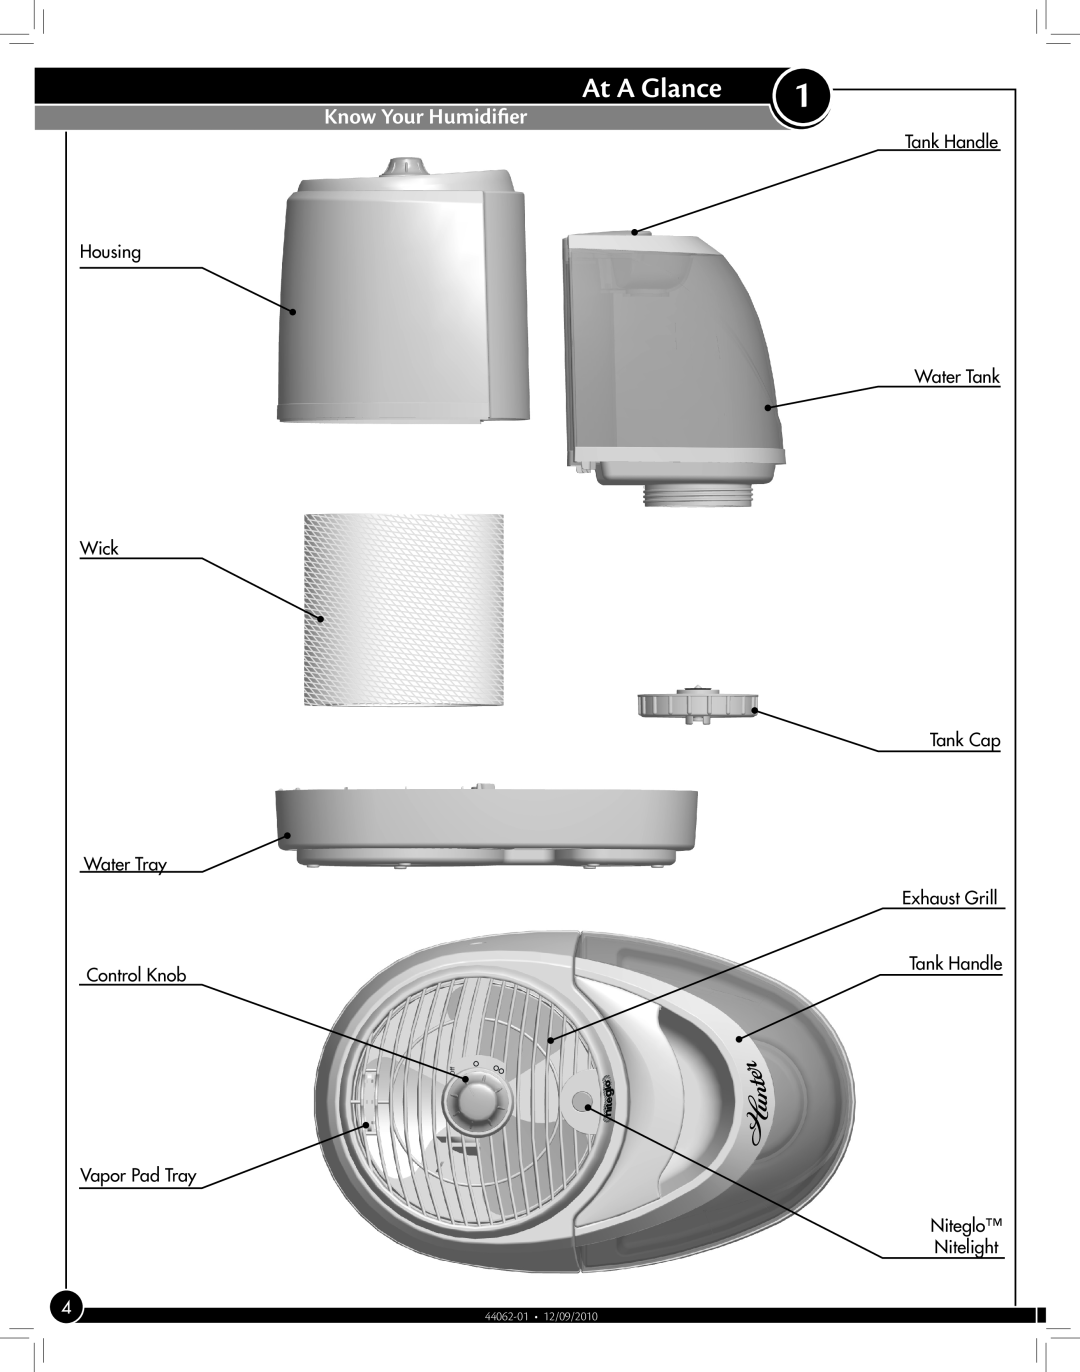 Hunter Fan 33116, 33118 manual Know Your Humidifier, At A Glance 